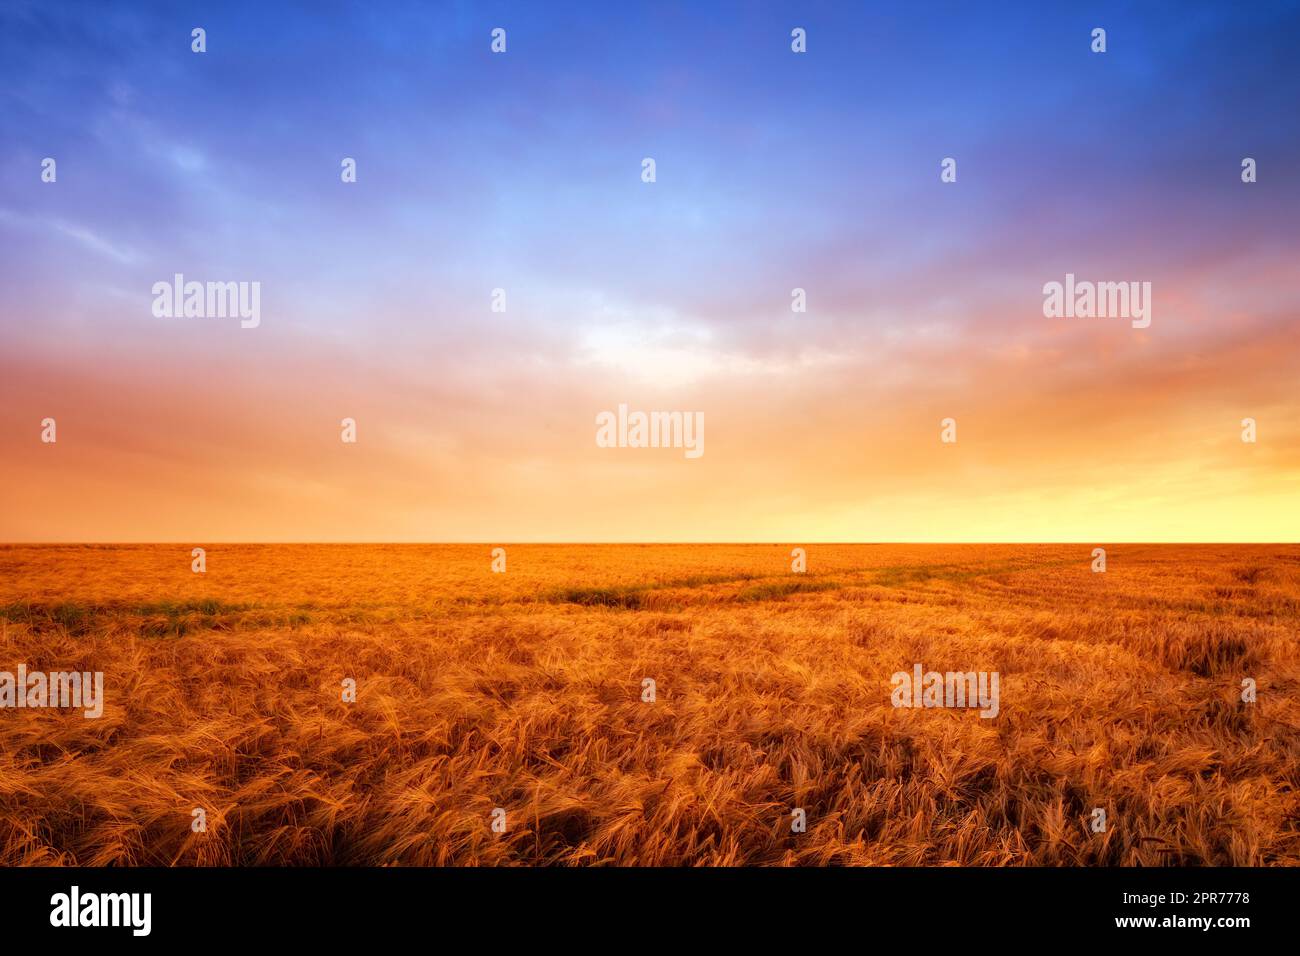 A vibrant country field in harvest. Beautiful sunset in a field of ripe wheat. Scenic dramatic light. Gorgeous nature open field, dreamy healing on a textured field, hopeful resilience wallpaper Stock Photo